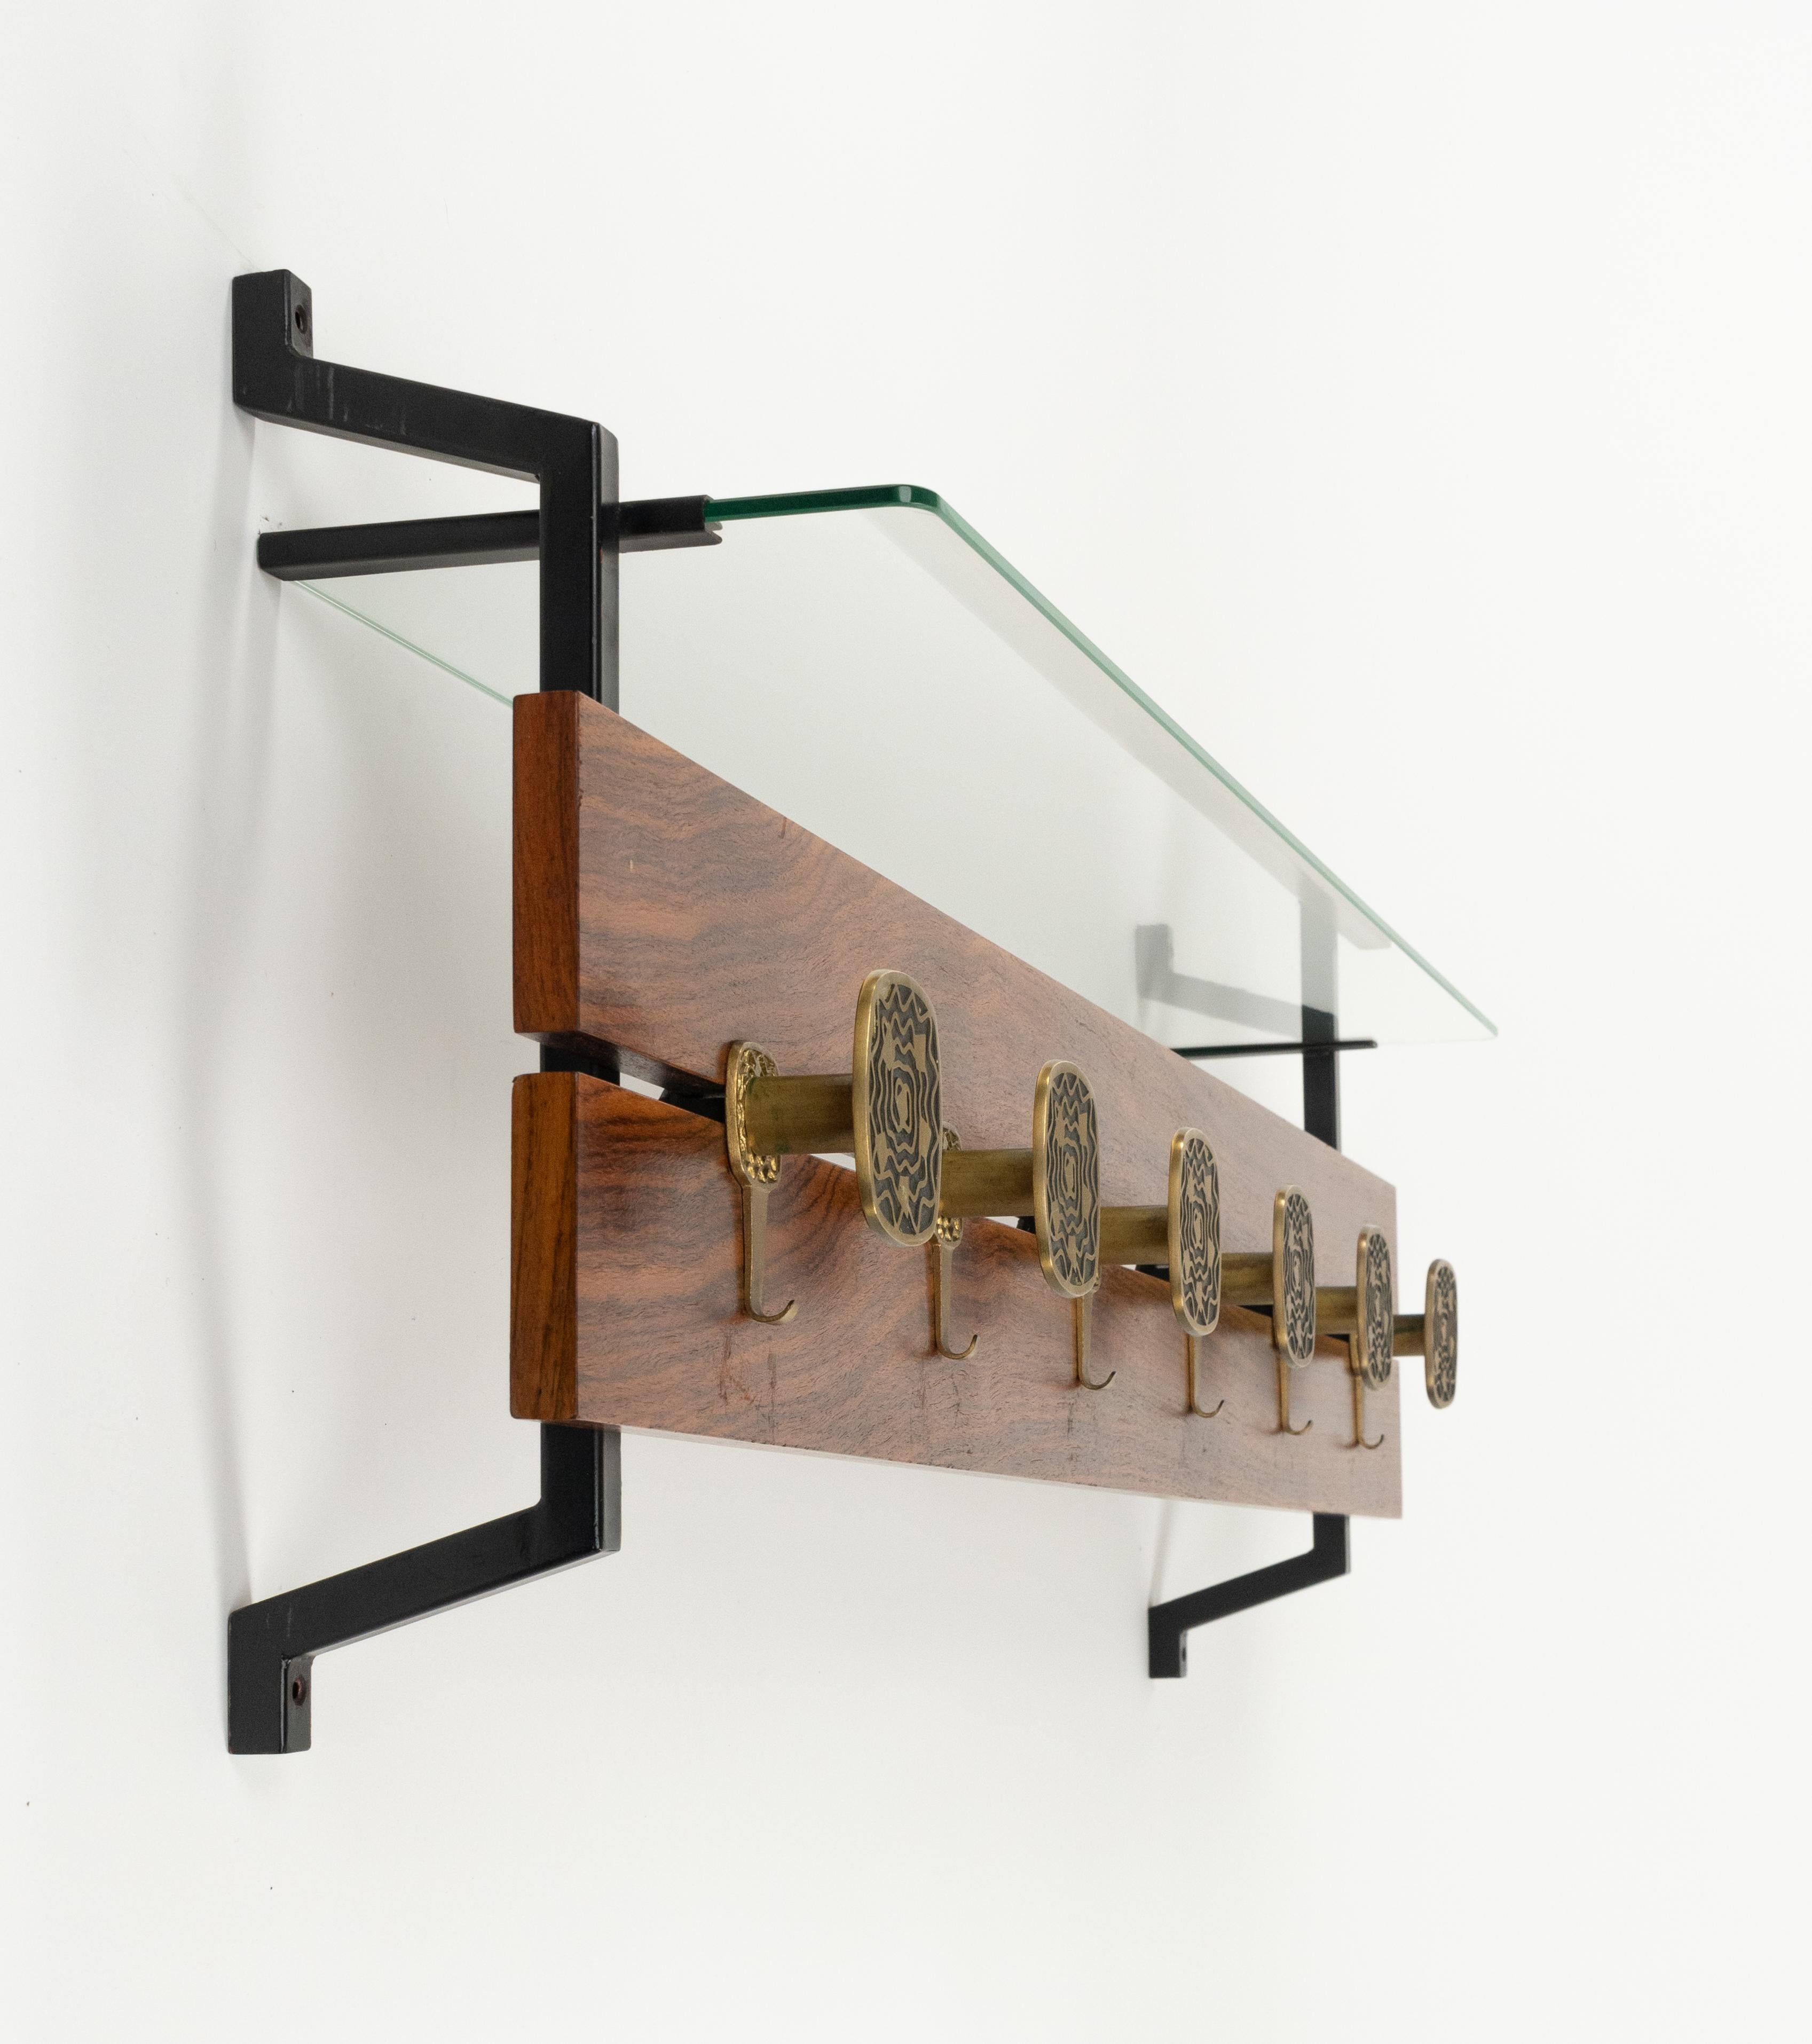 Midcentury Wood, Glass and Brass Coat Rack Herta Baller Style, Italy 1970s For Sale 8